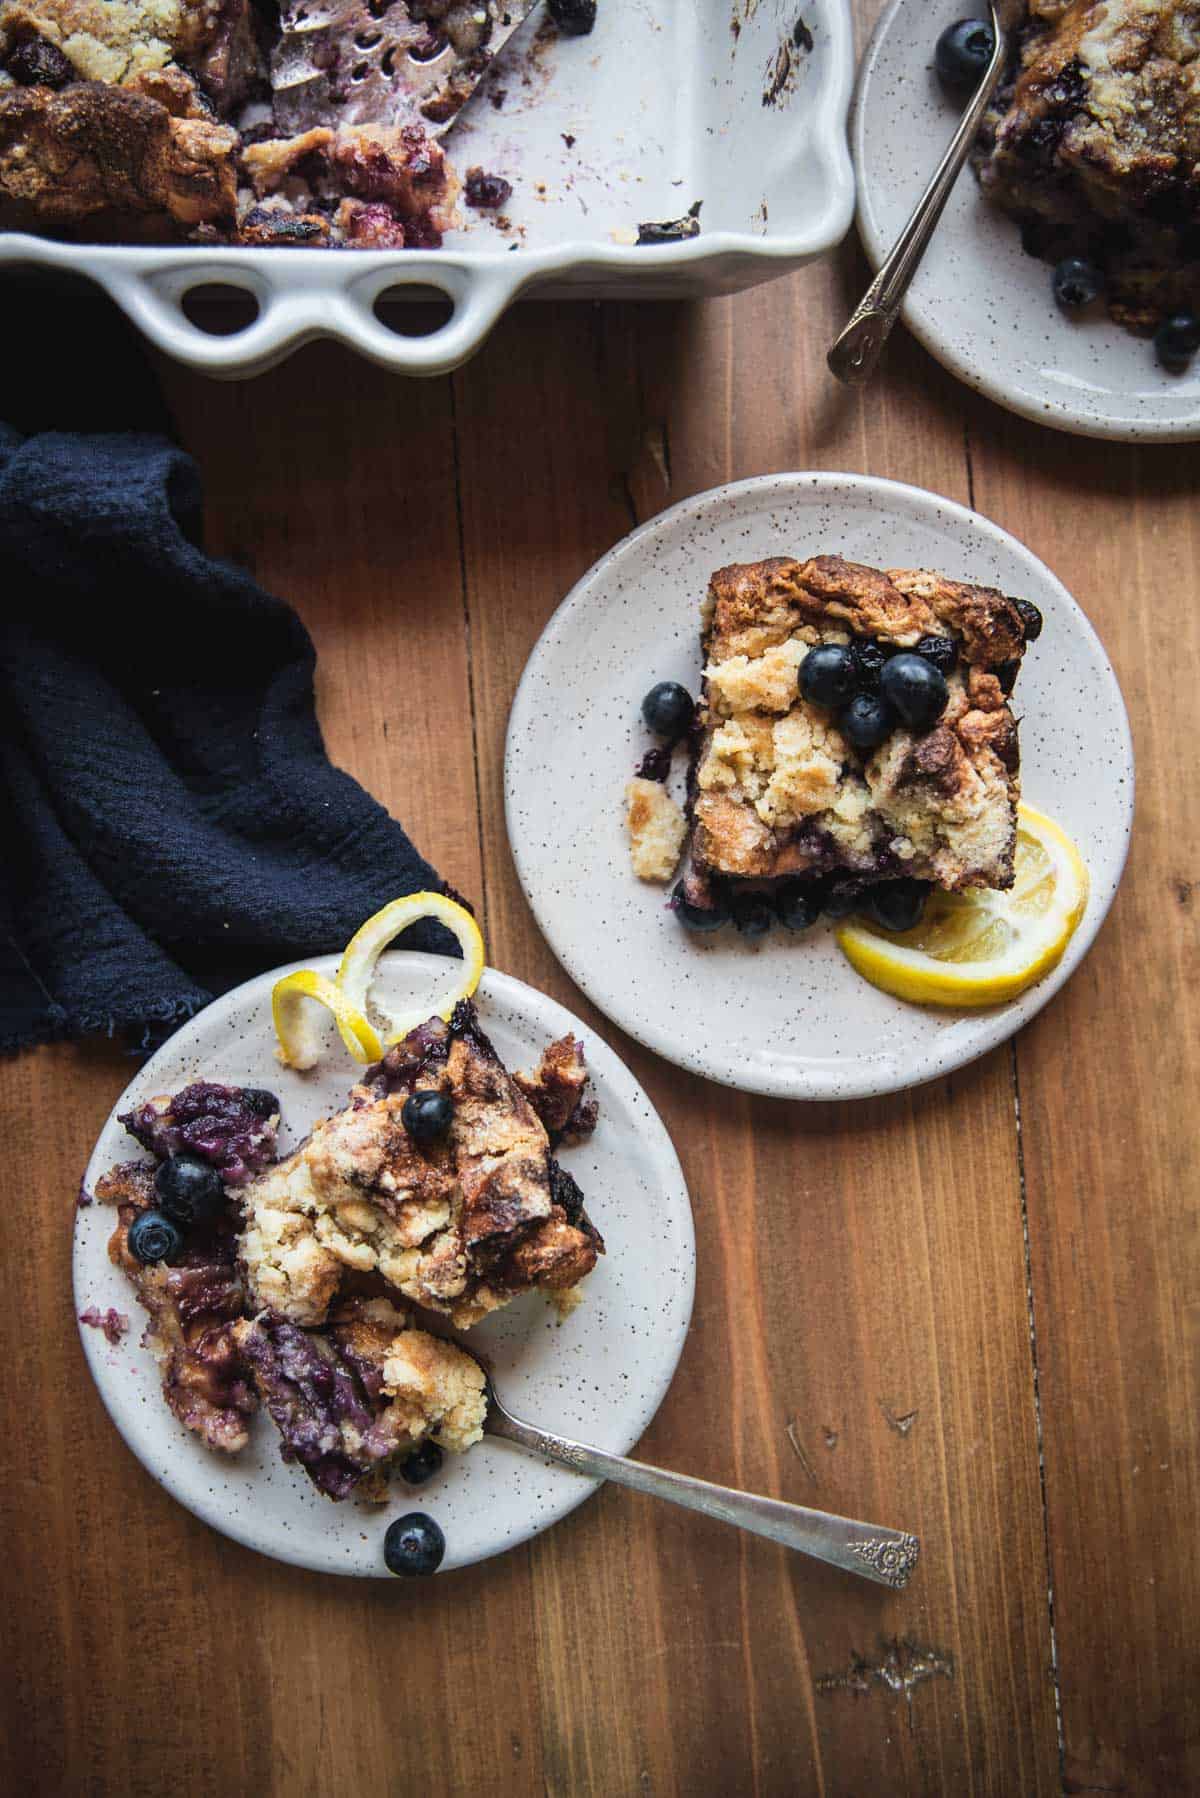 overhead image of two plates with square pieces of french toast casserole baked with blueberries andd topped with fresh blueberries and lemon twists.  Plates are next to the casserole in a baking dish on a blue linen napkin.